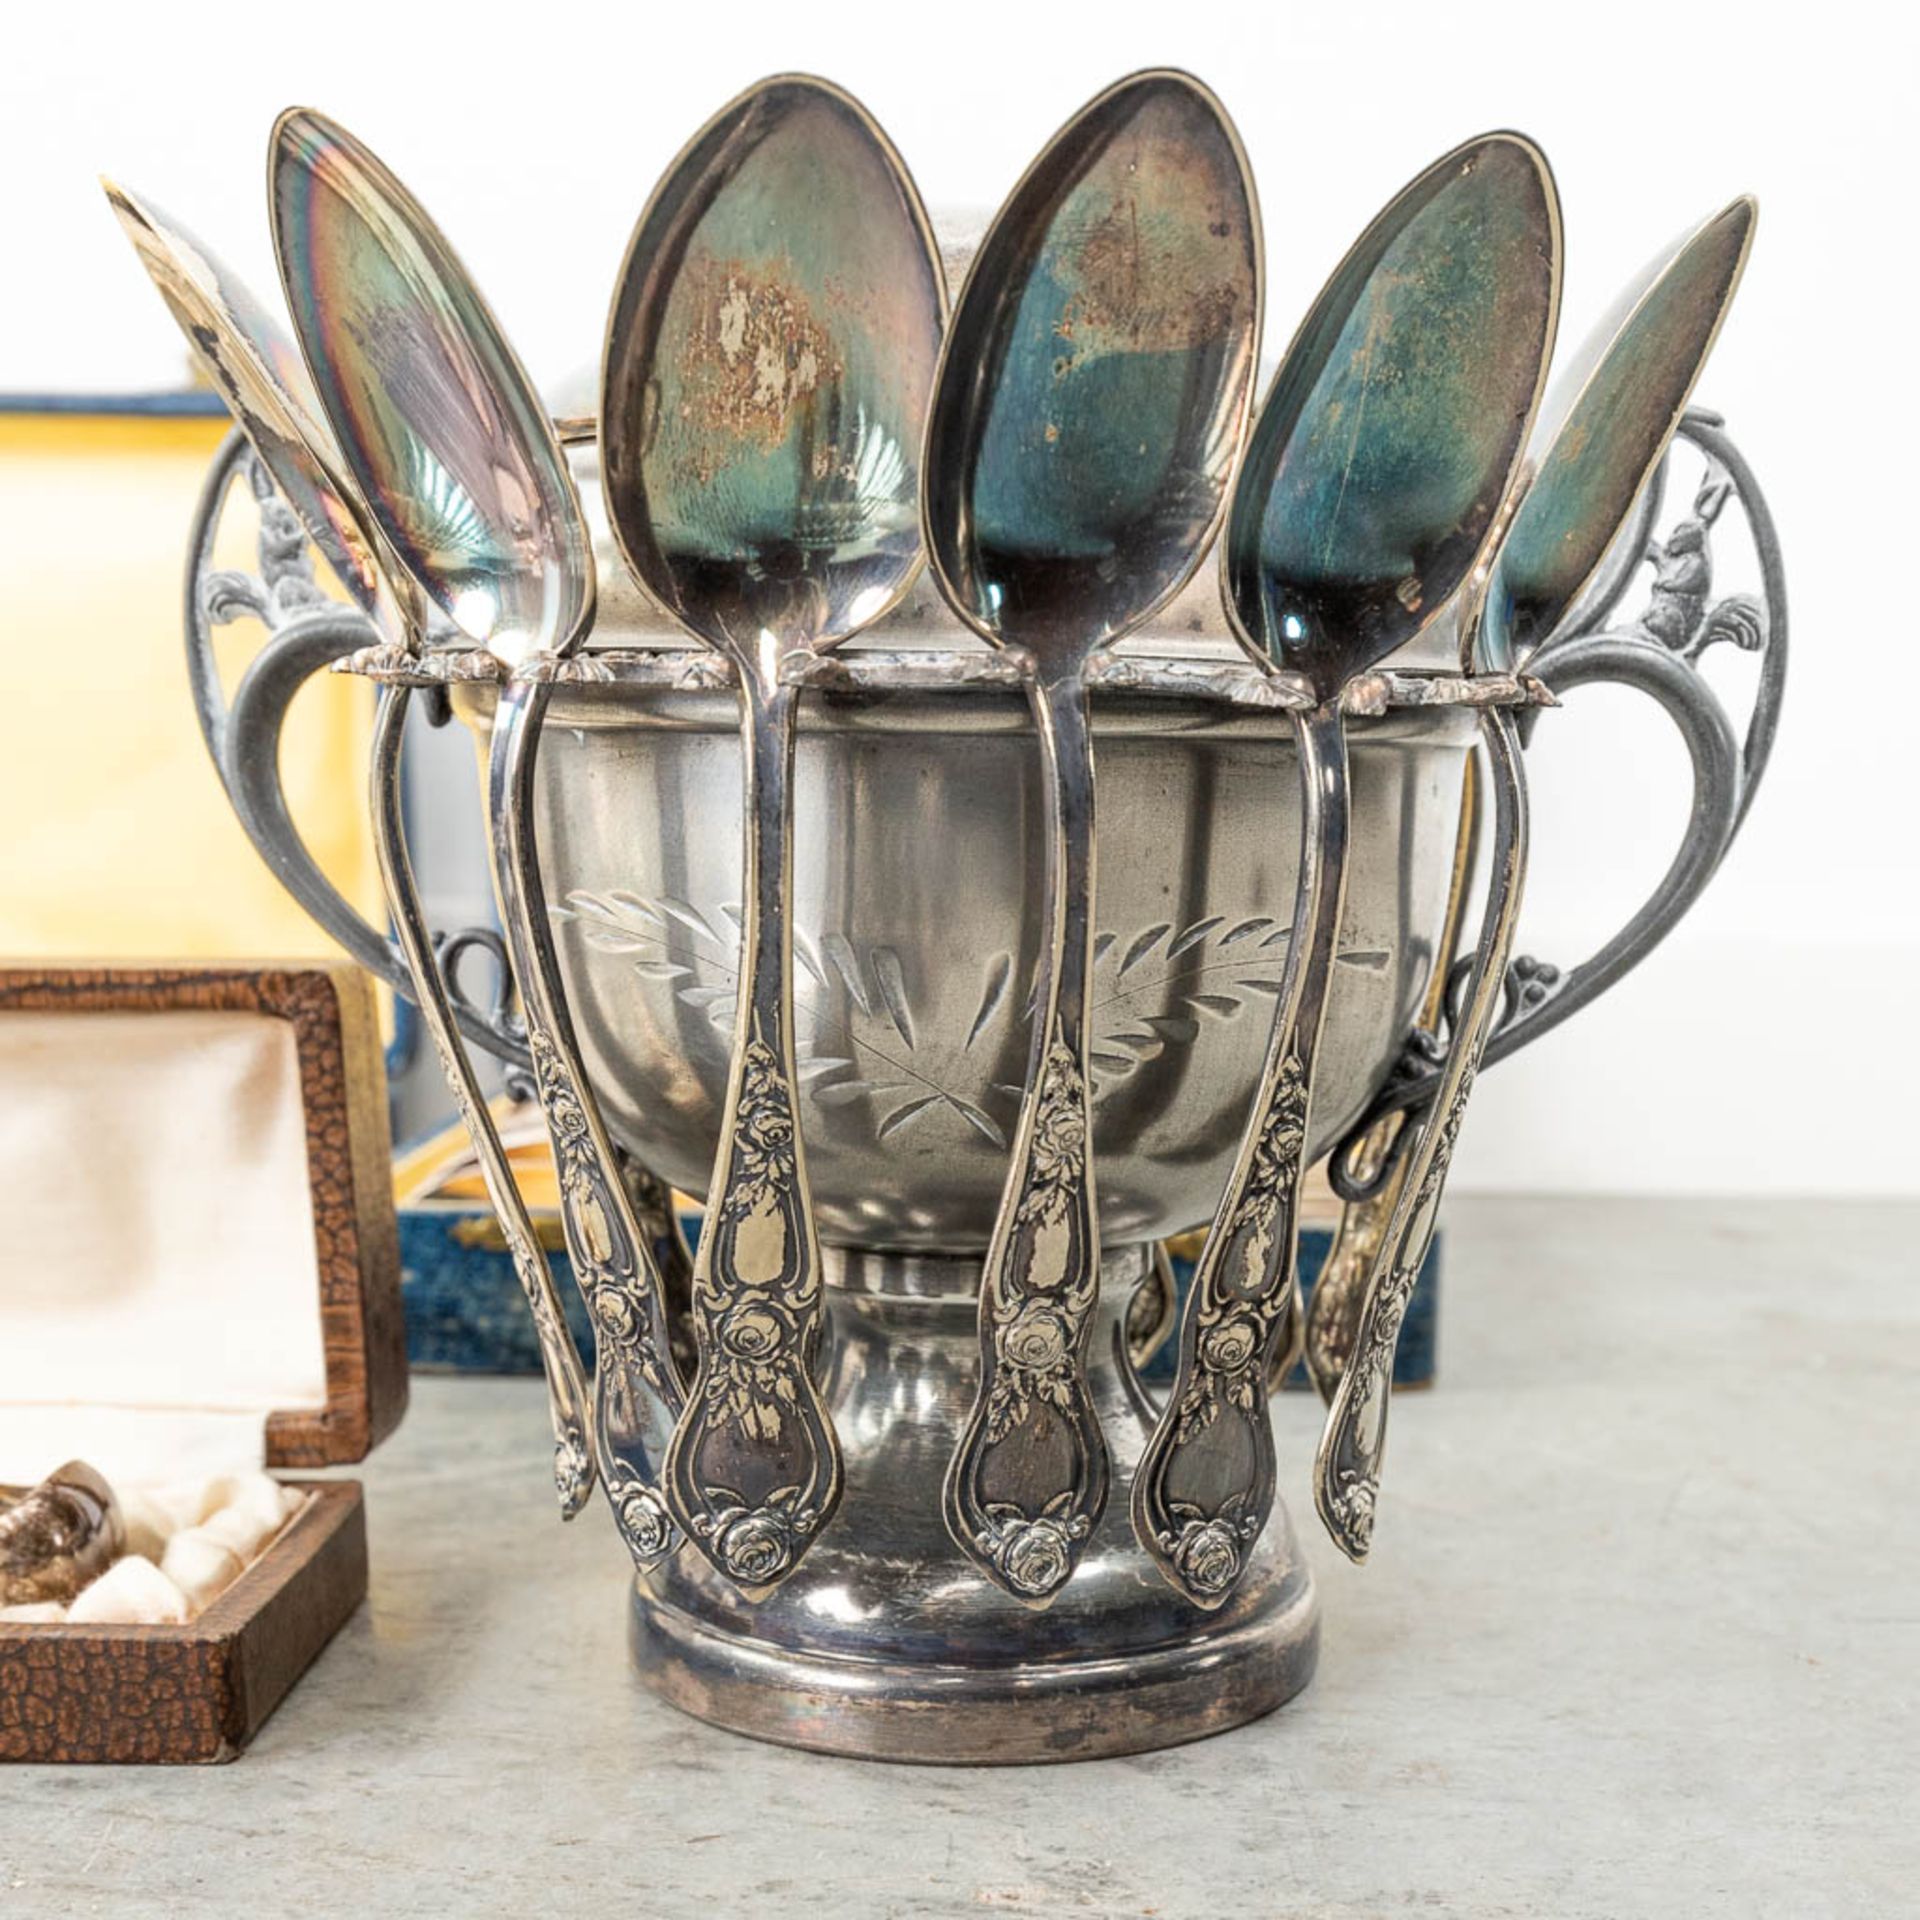 An assembled collection of silver-plated cutlery and accessories. - Image 3 of 15